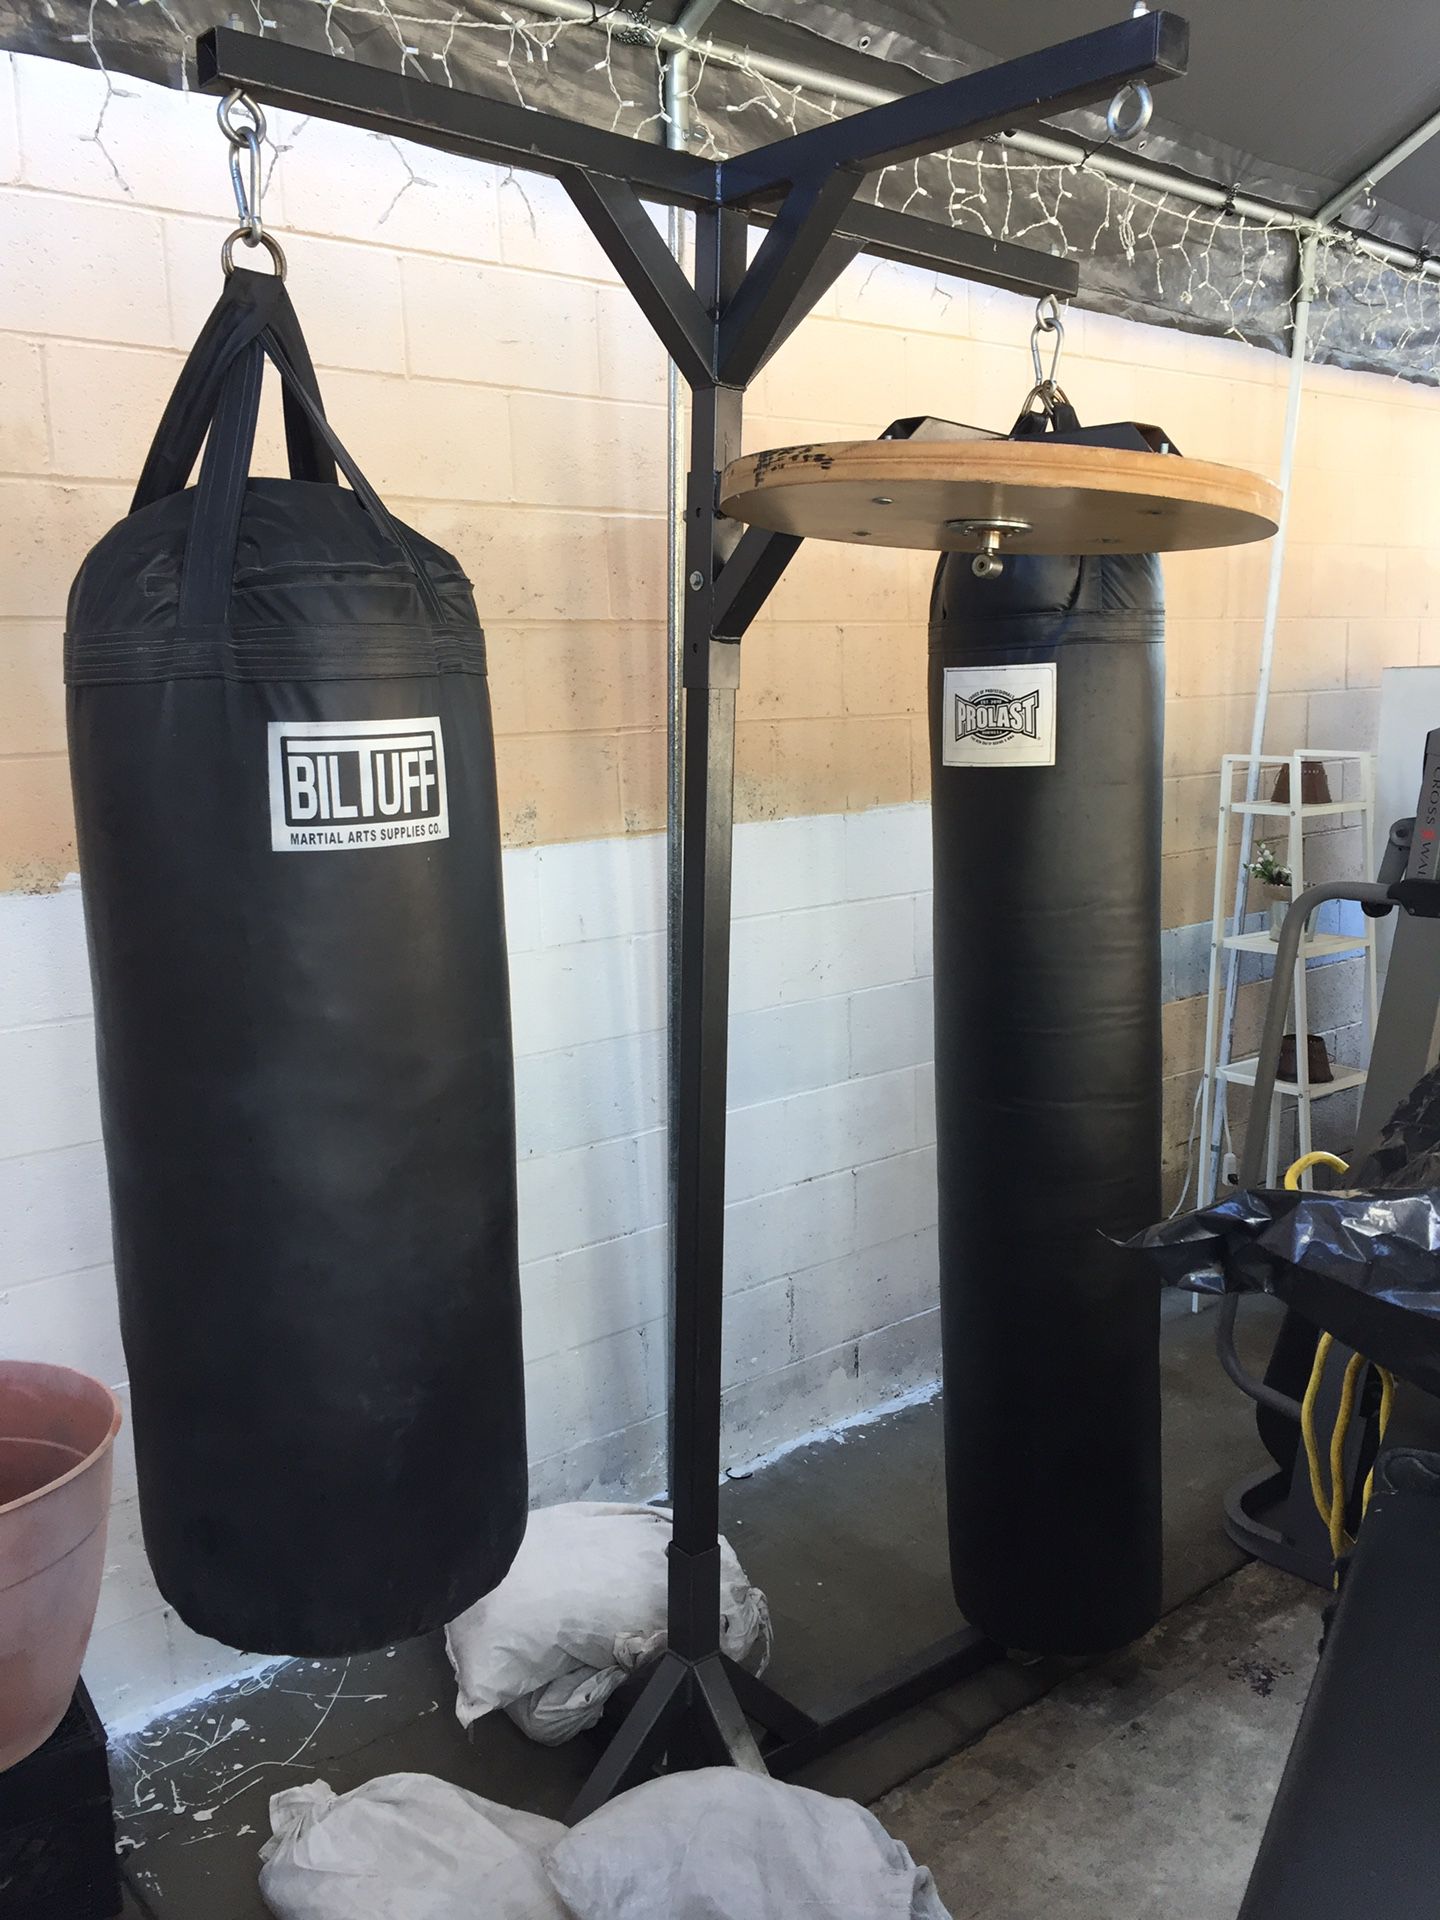 Boxing. 2 punching bags with stand (heavy bags)